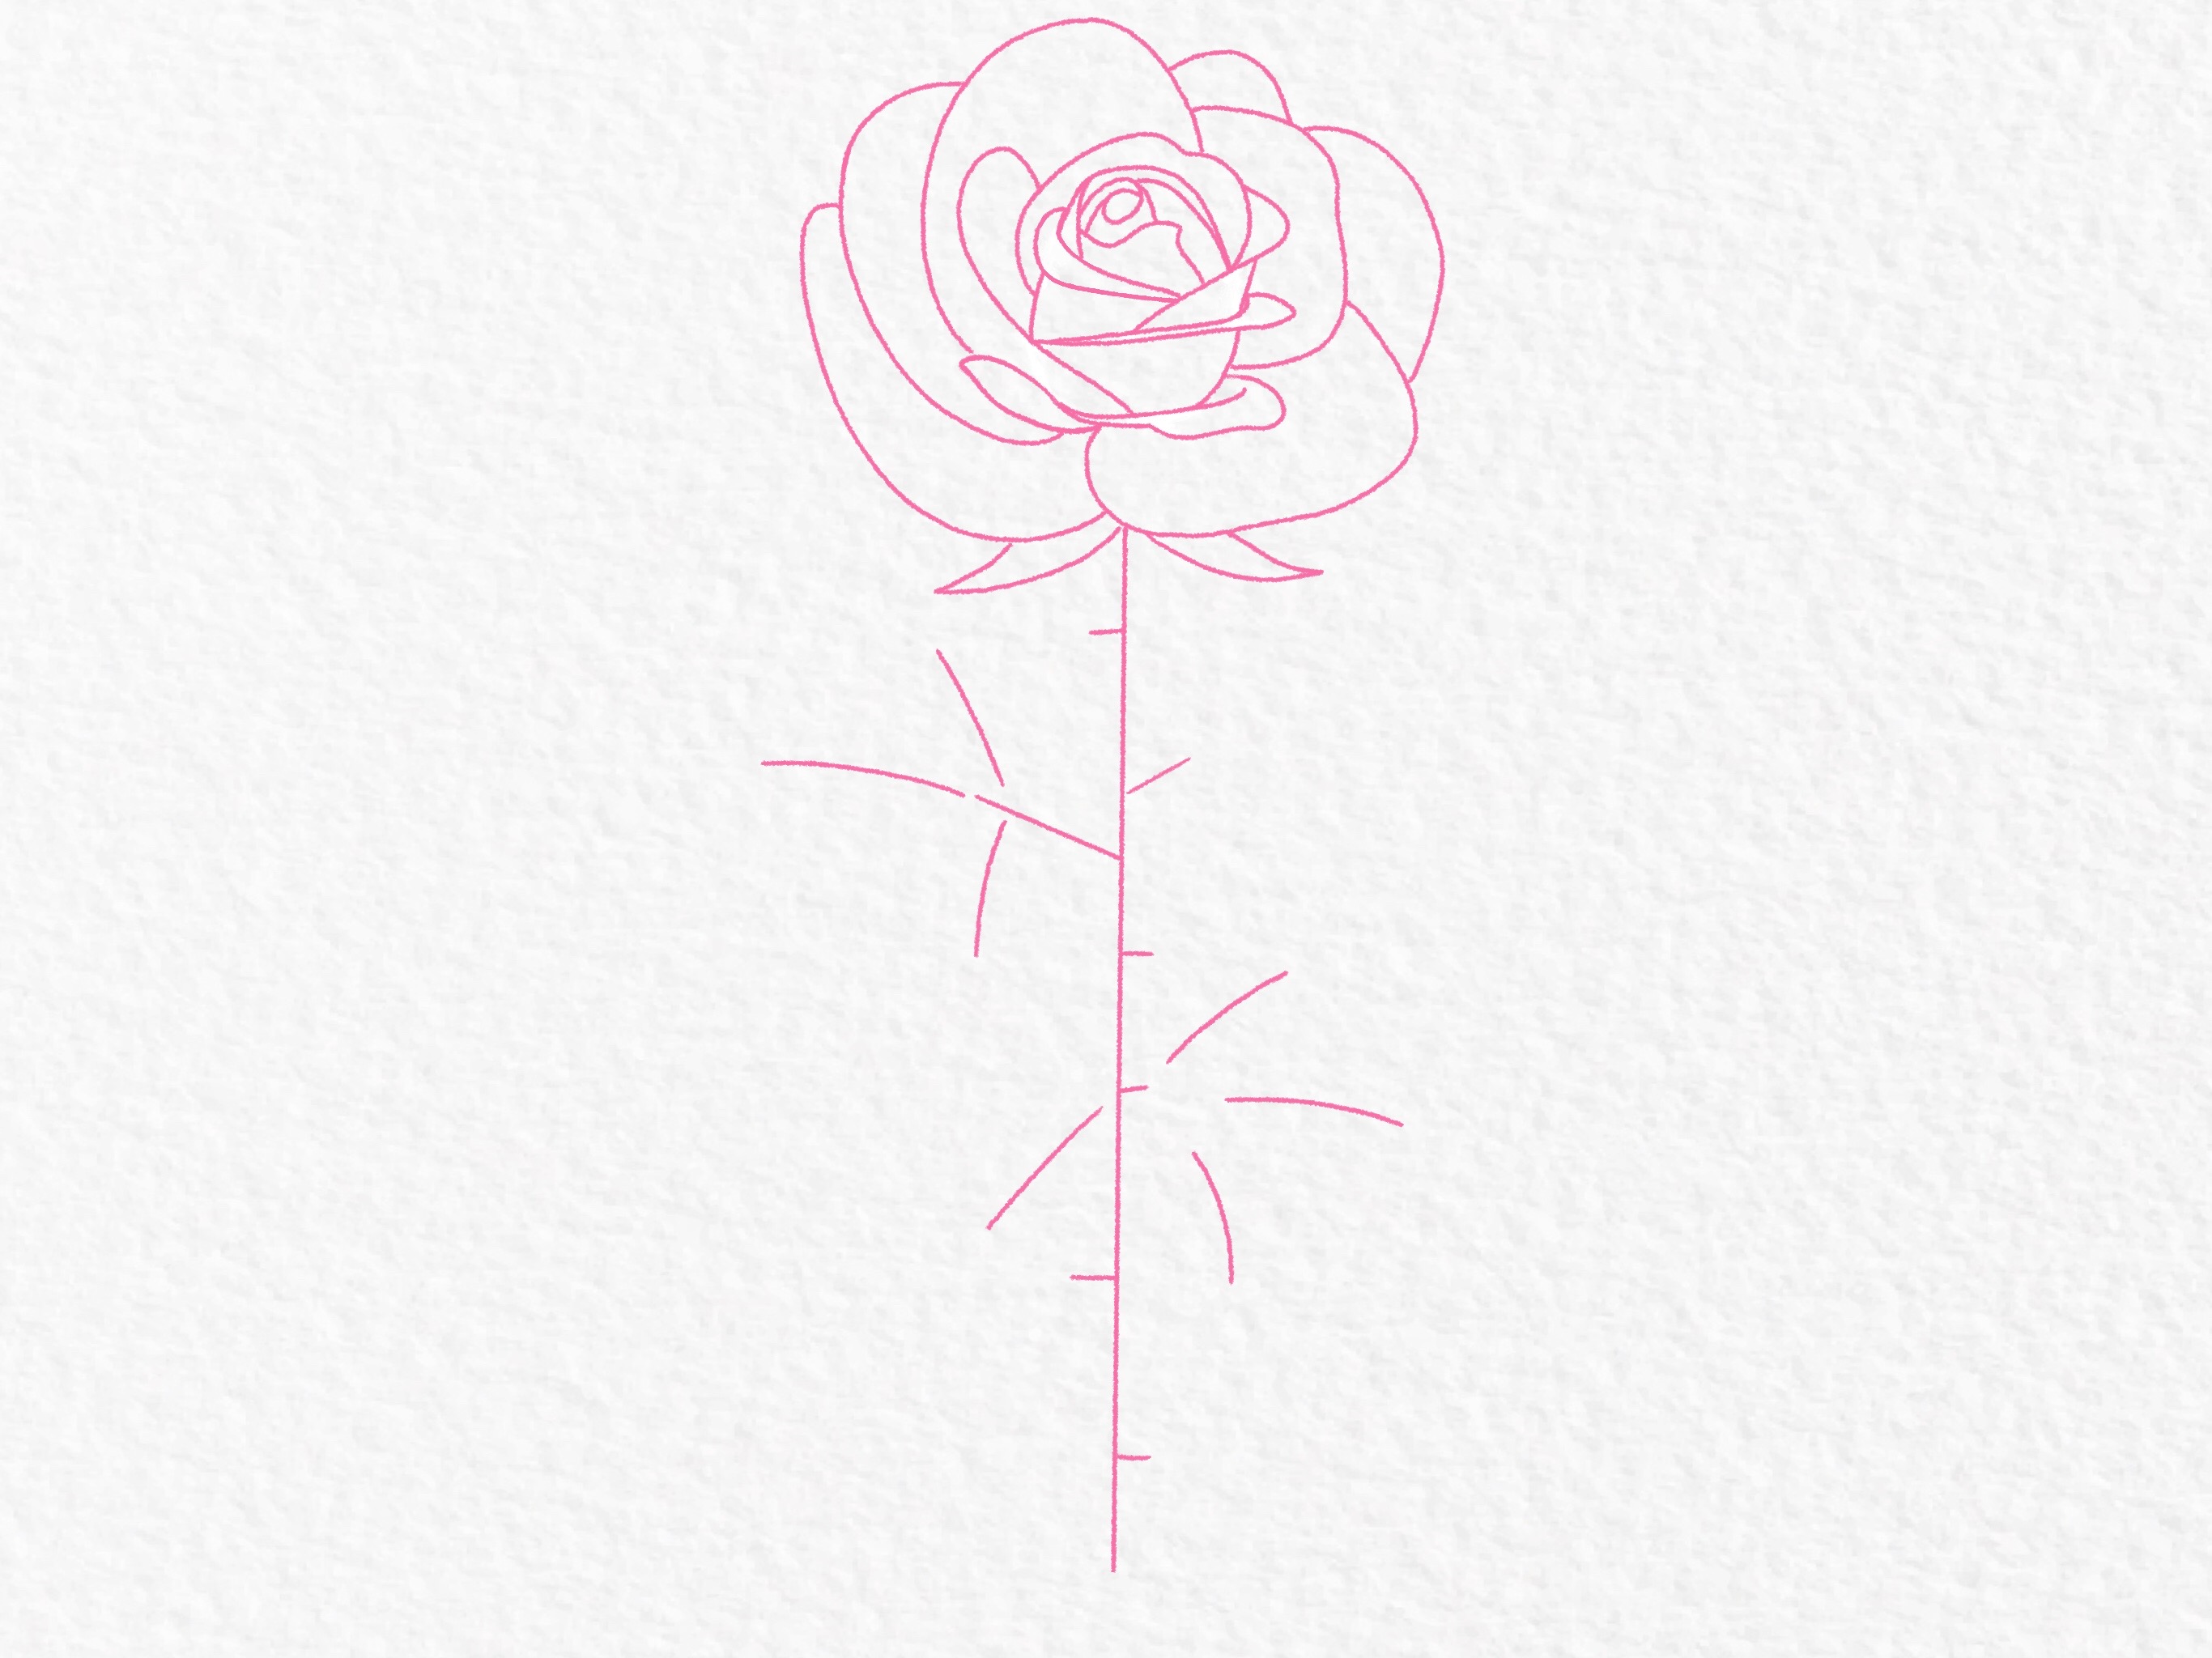 How to draw a rose, step by step drawing tutorial - step 23